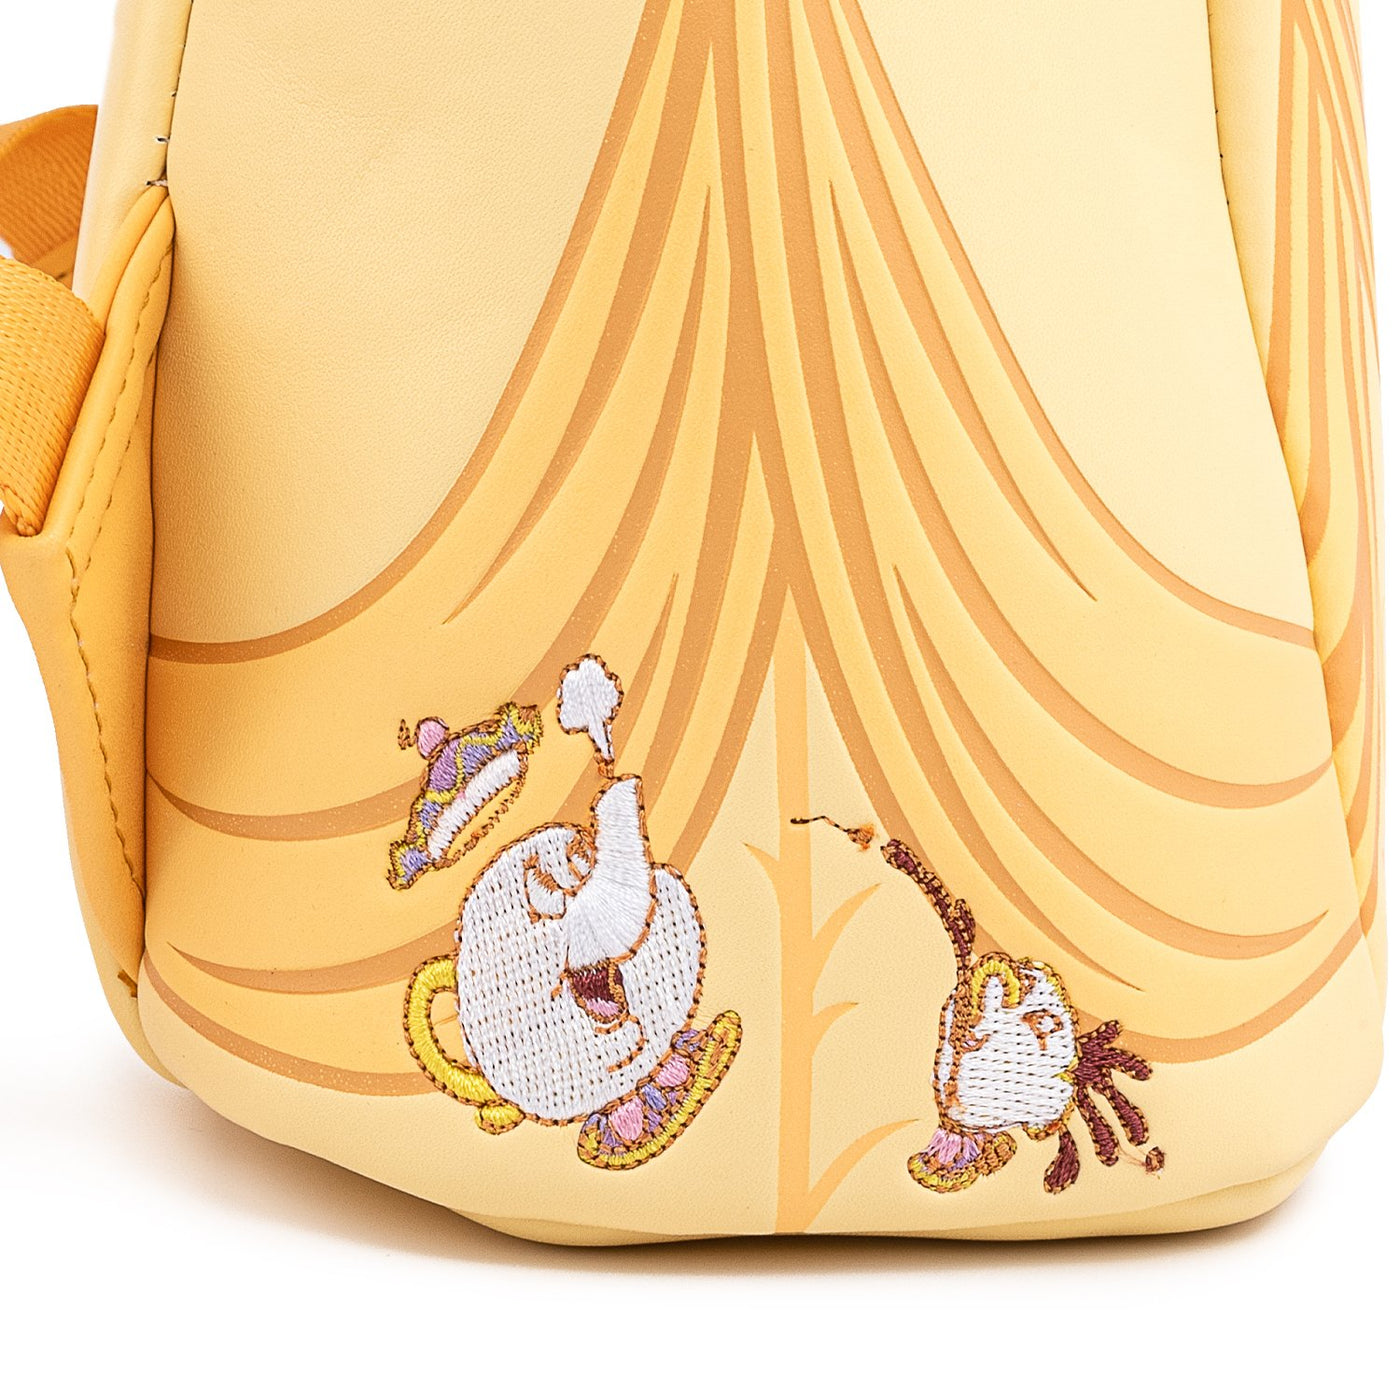 Disney Beauty and the Beast Belle Cosplay Mini Backpack